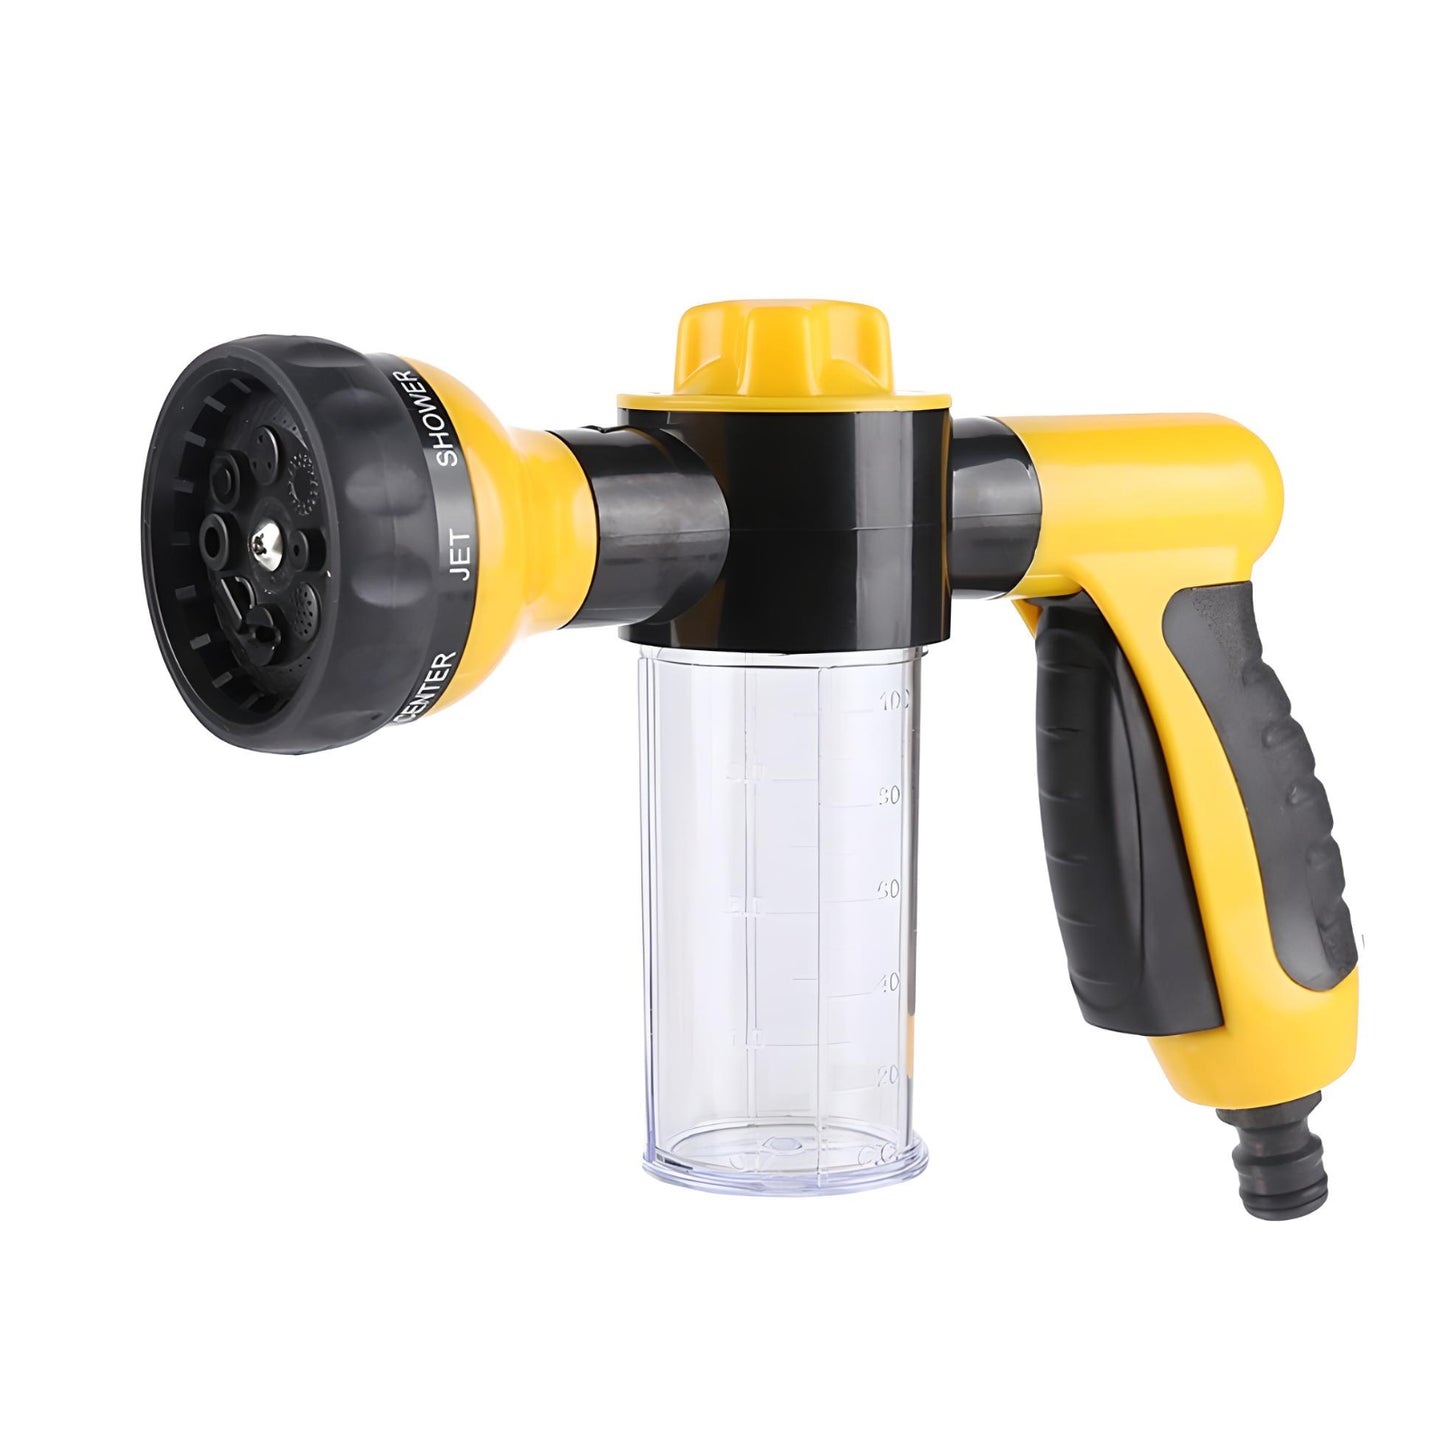 Dog Wash Hose Attachment with Soap Dispenser - yellow